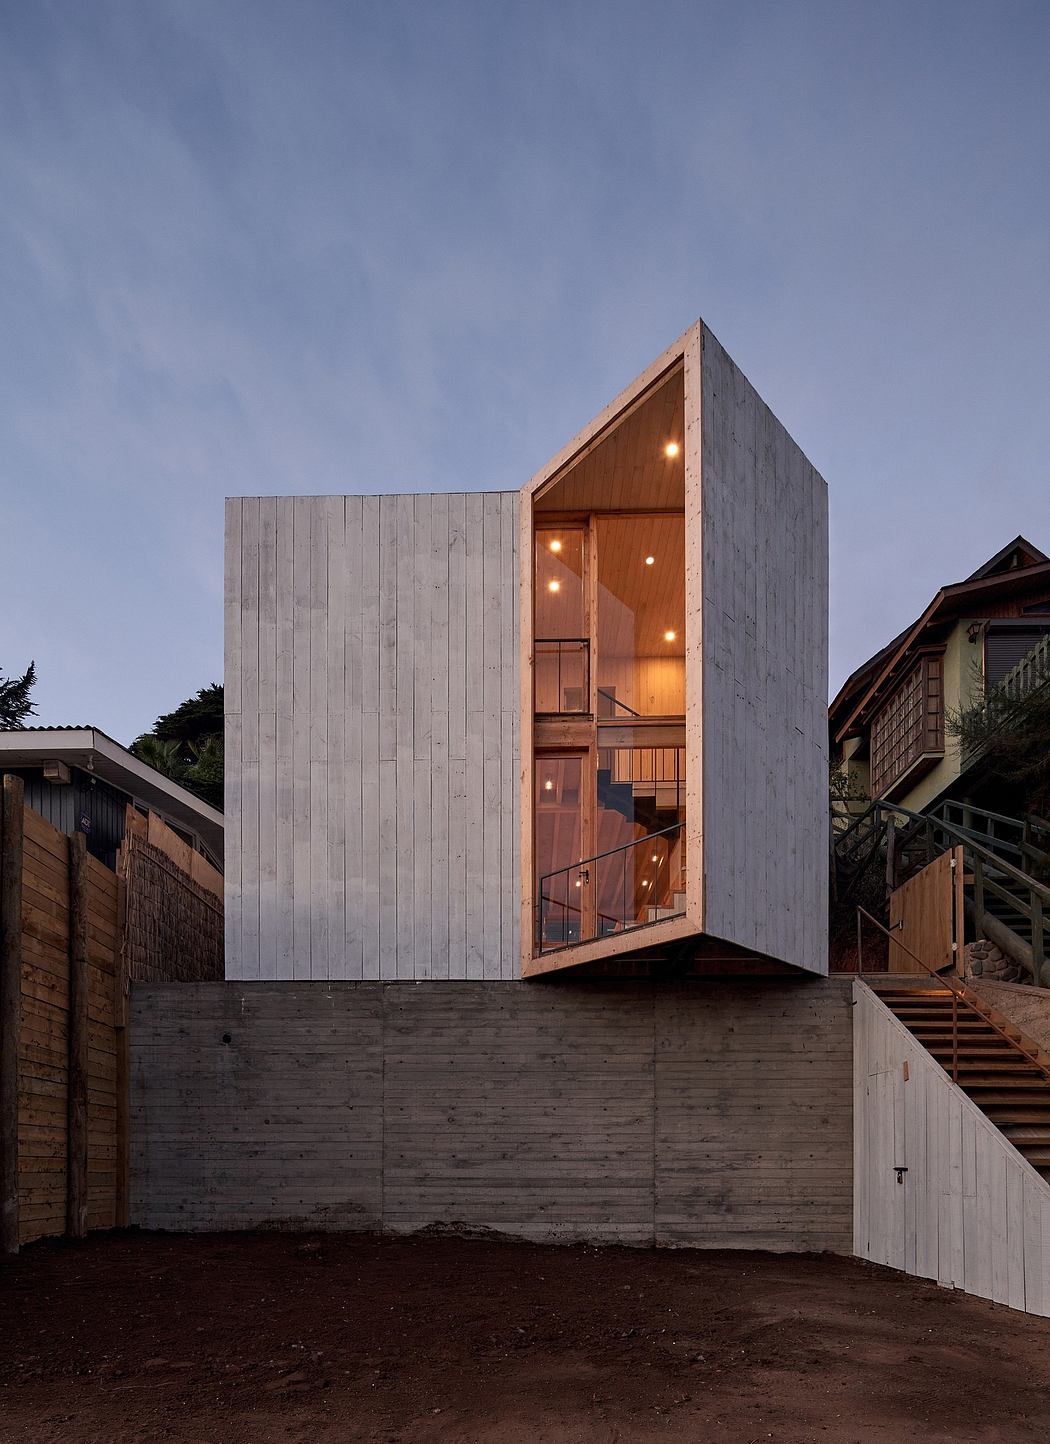 Contemporary vertical wooden house with large windows at dusk.